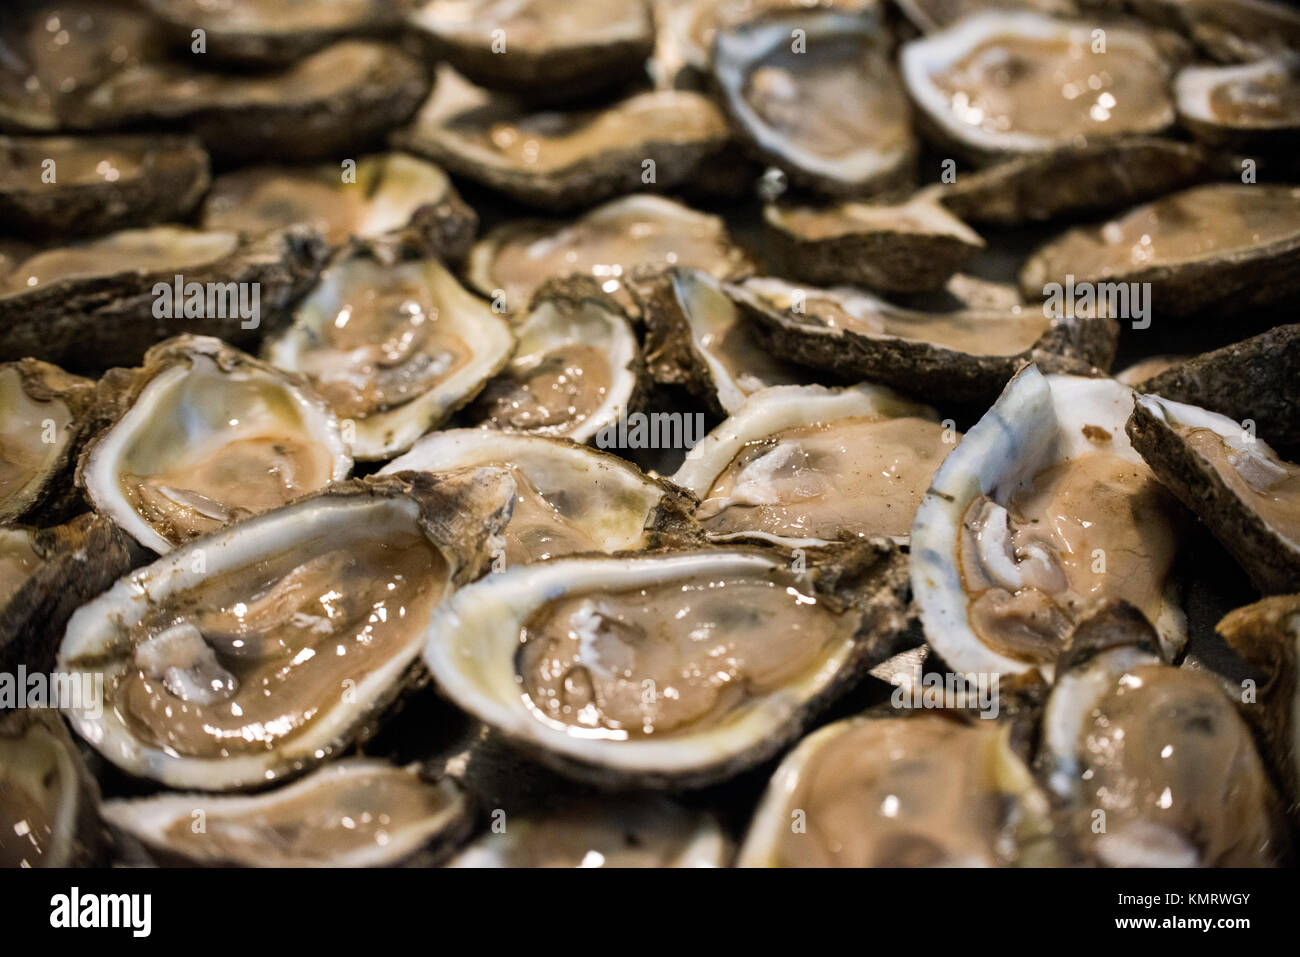 Detail shot of fresh shucked oysters piled on a tray. Stock Photo